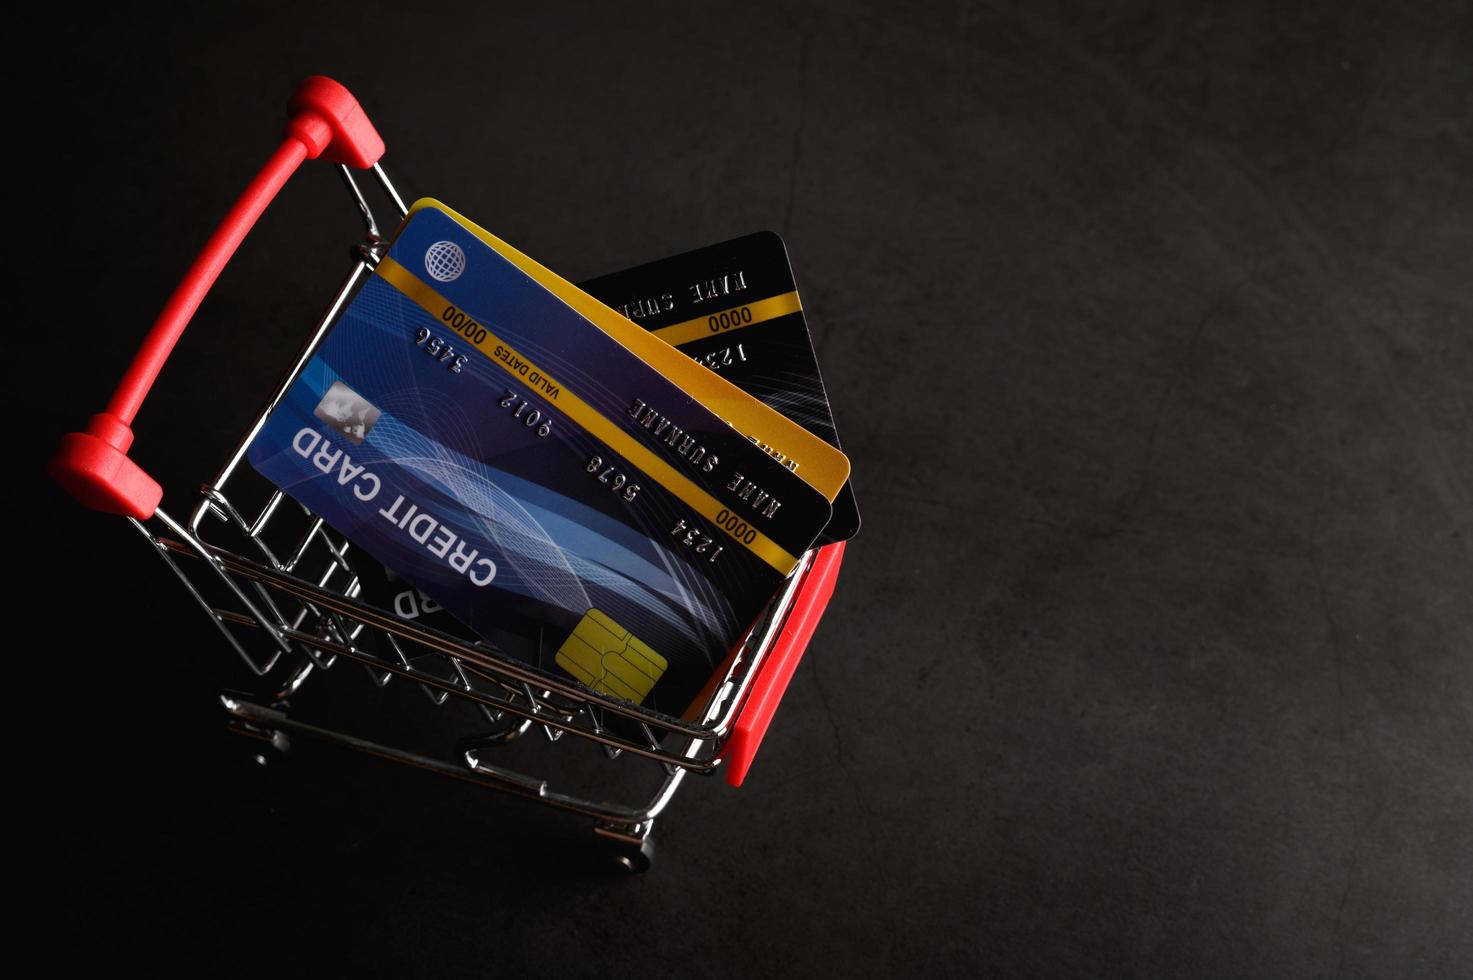 Credit card placed on the cart to pay for the product photo